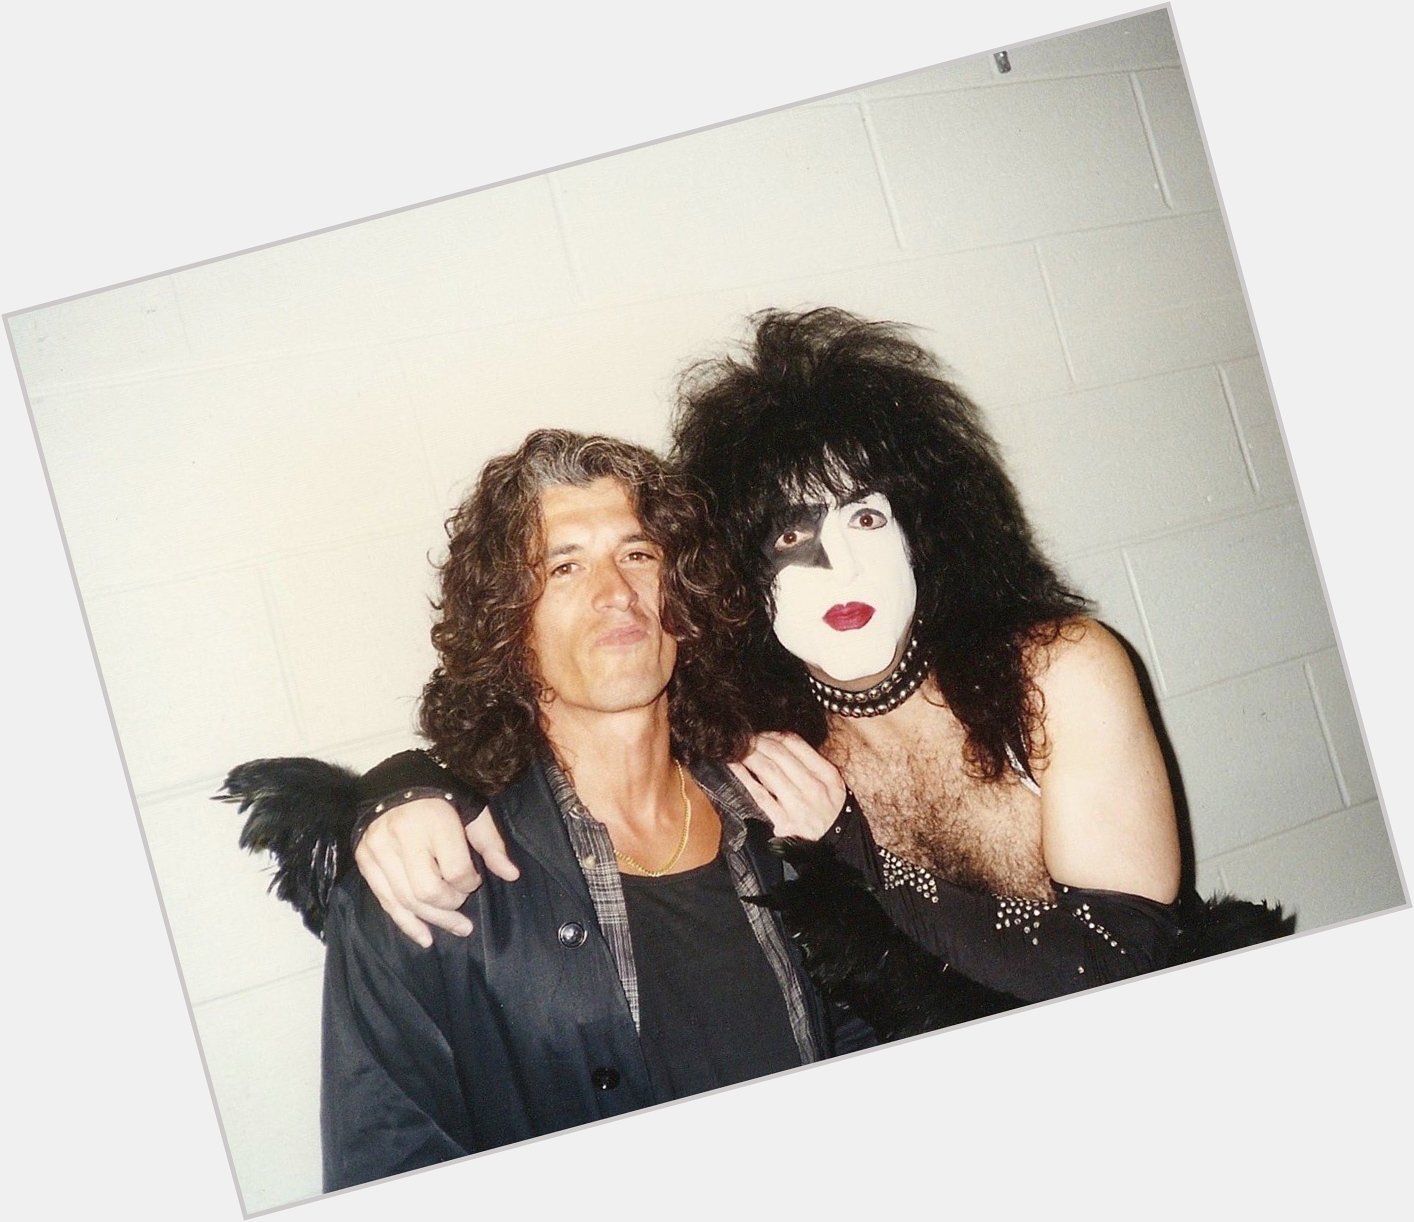 Happy Birthday to a real star! Mr. Paul Stanley.

Photo by: John Bionelli 